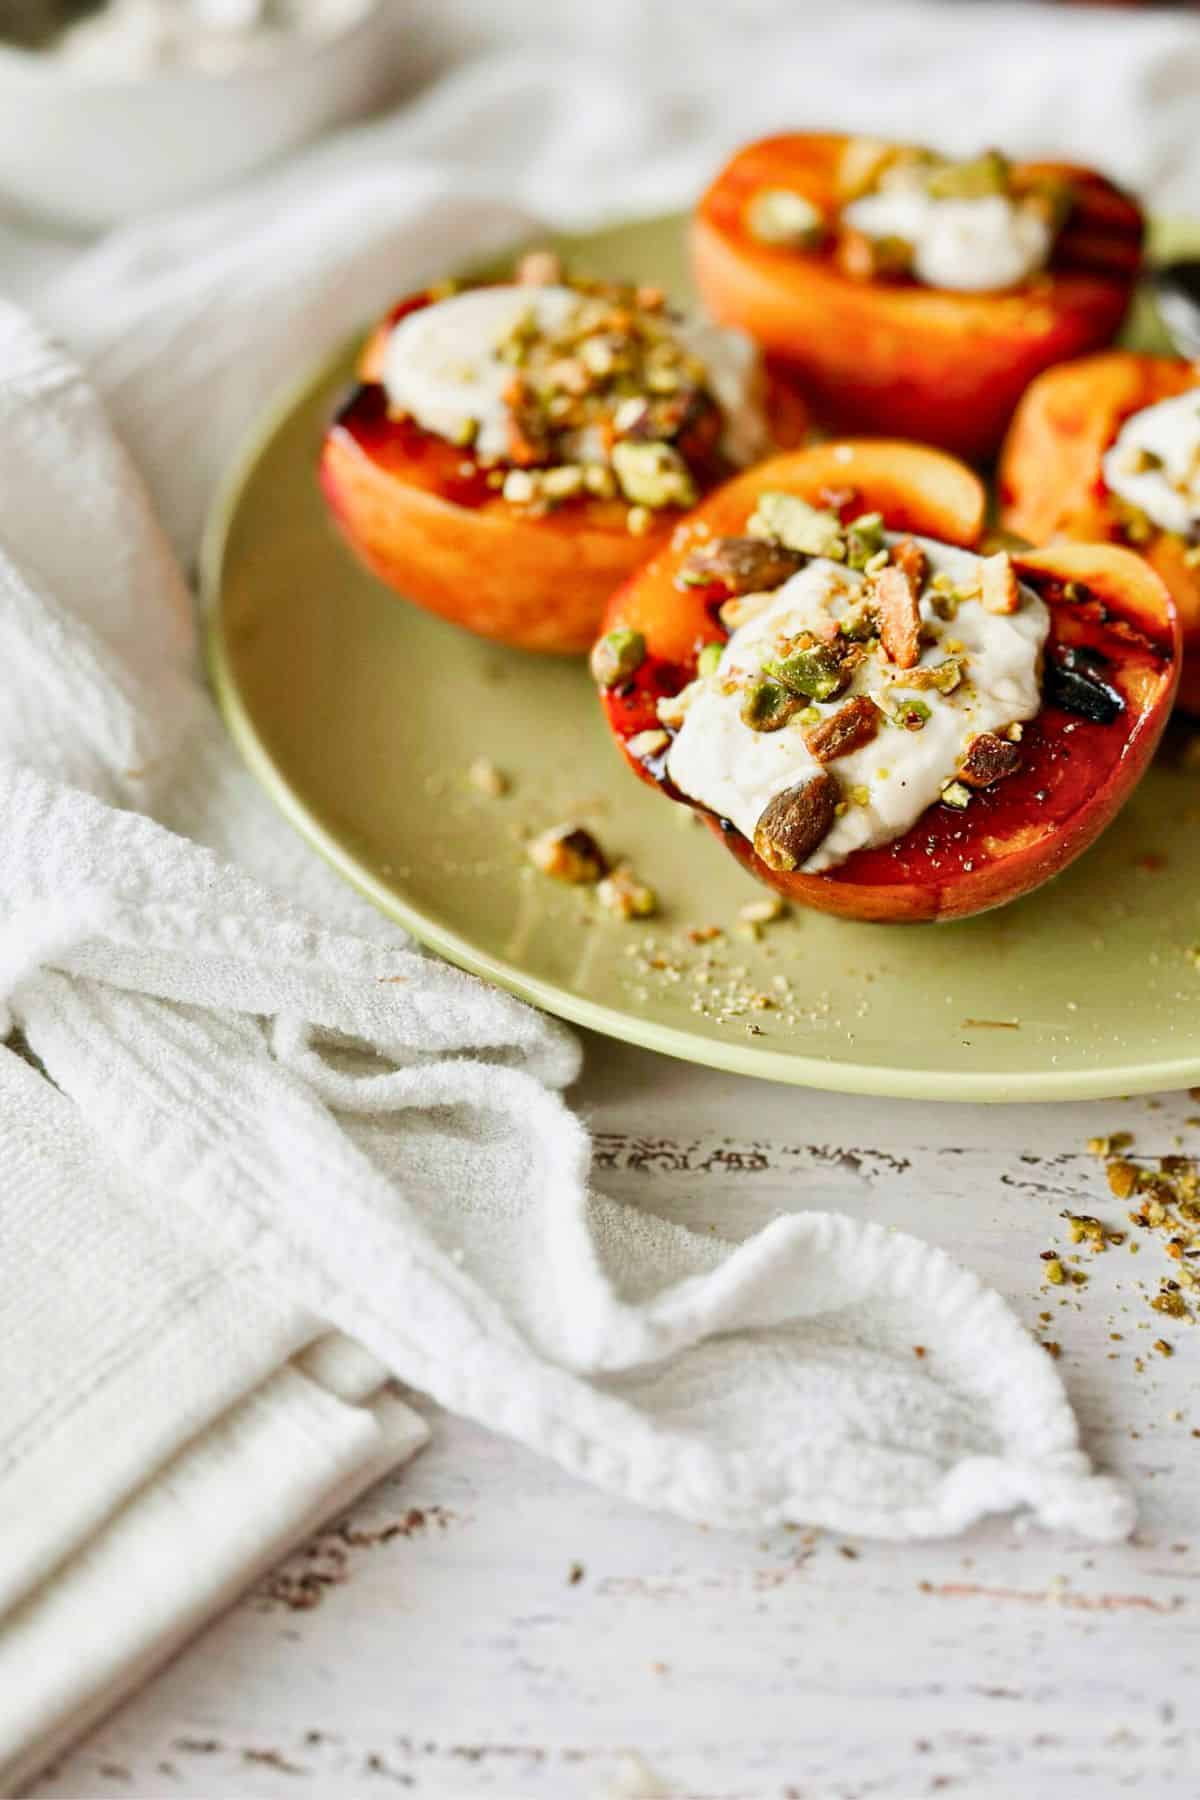 4 halves of Grilled Peaches With Creamy Vegan Mascarpone and Pistachios on a plate